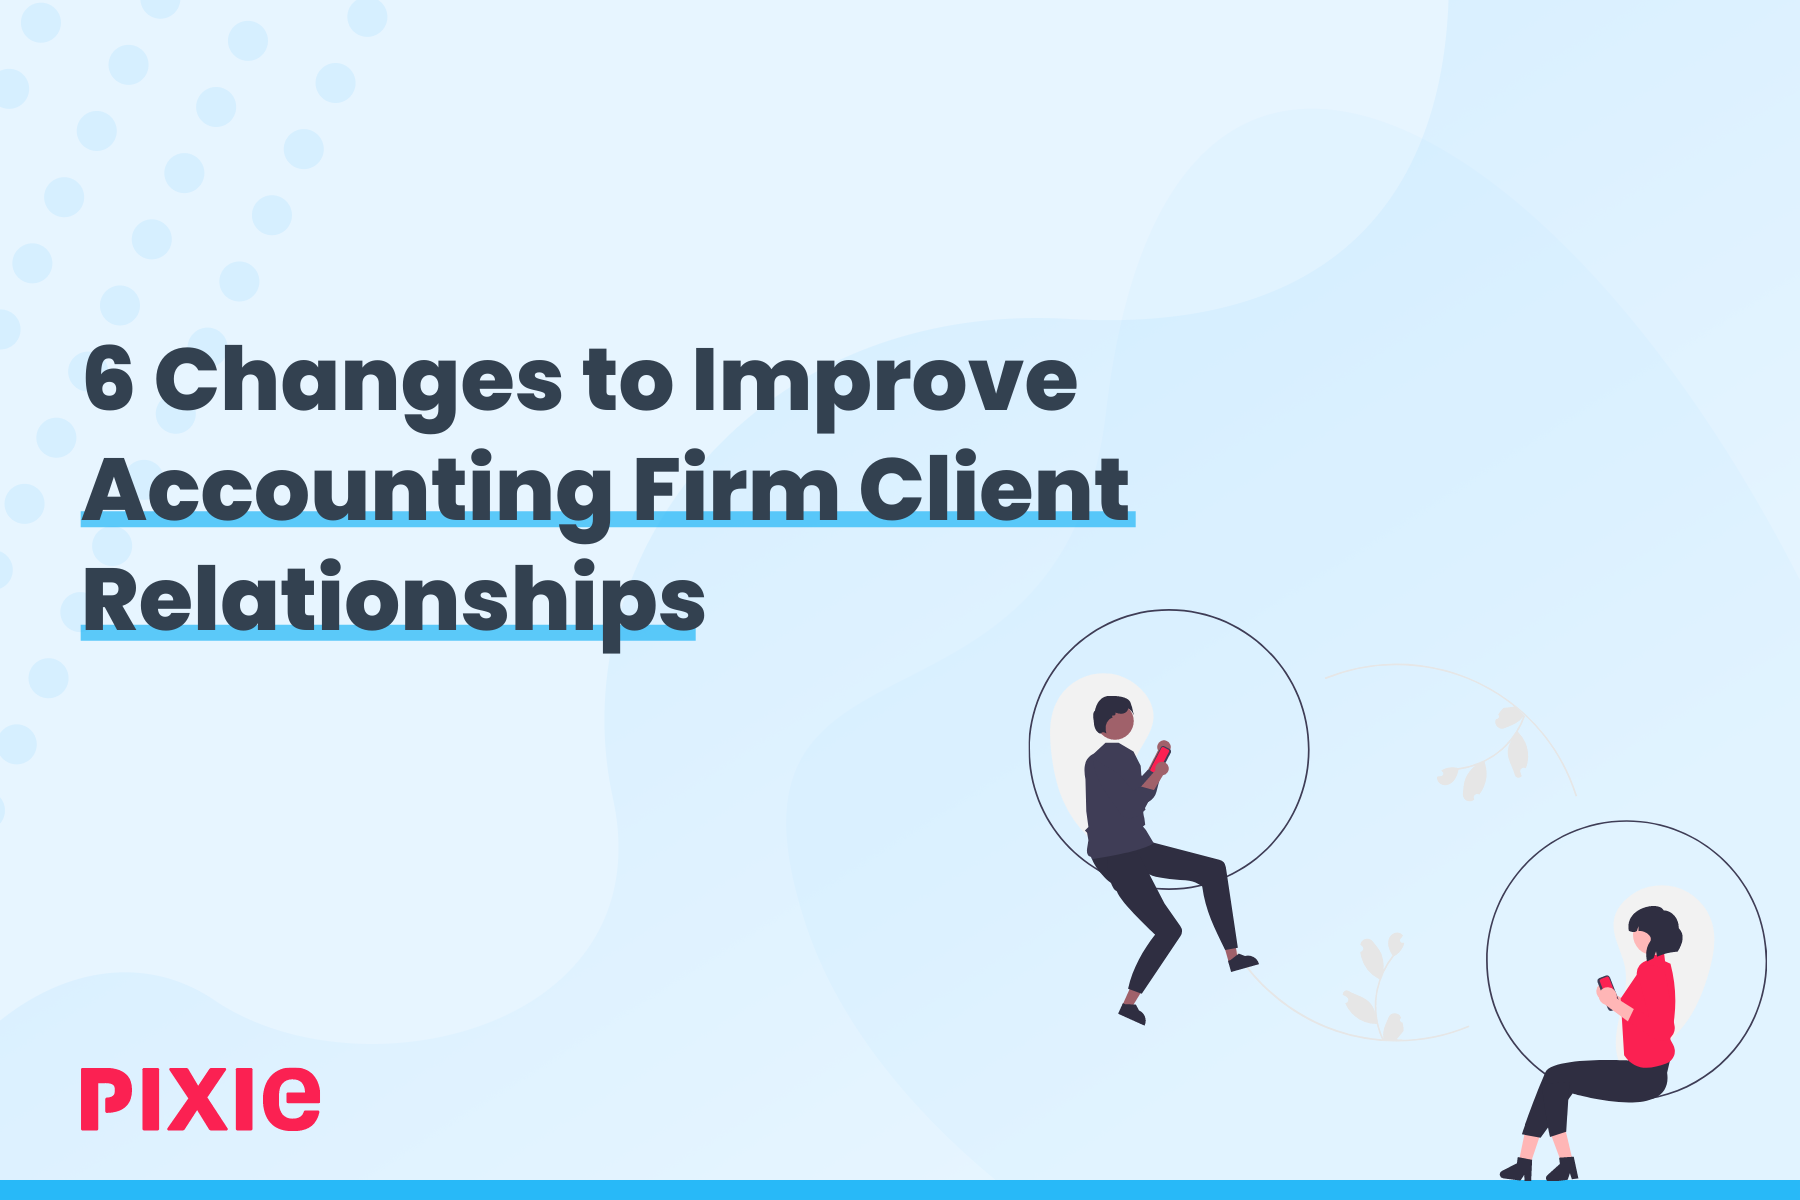 6 Changes to Improve Accounting Firm Client Relationships